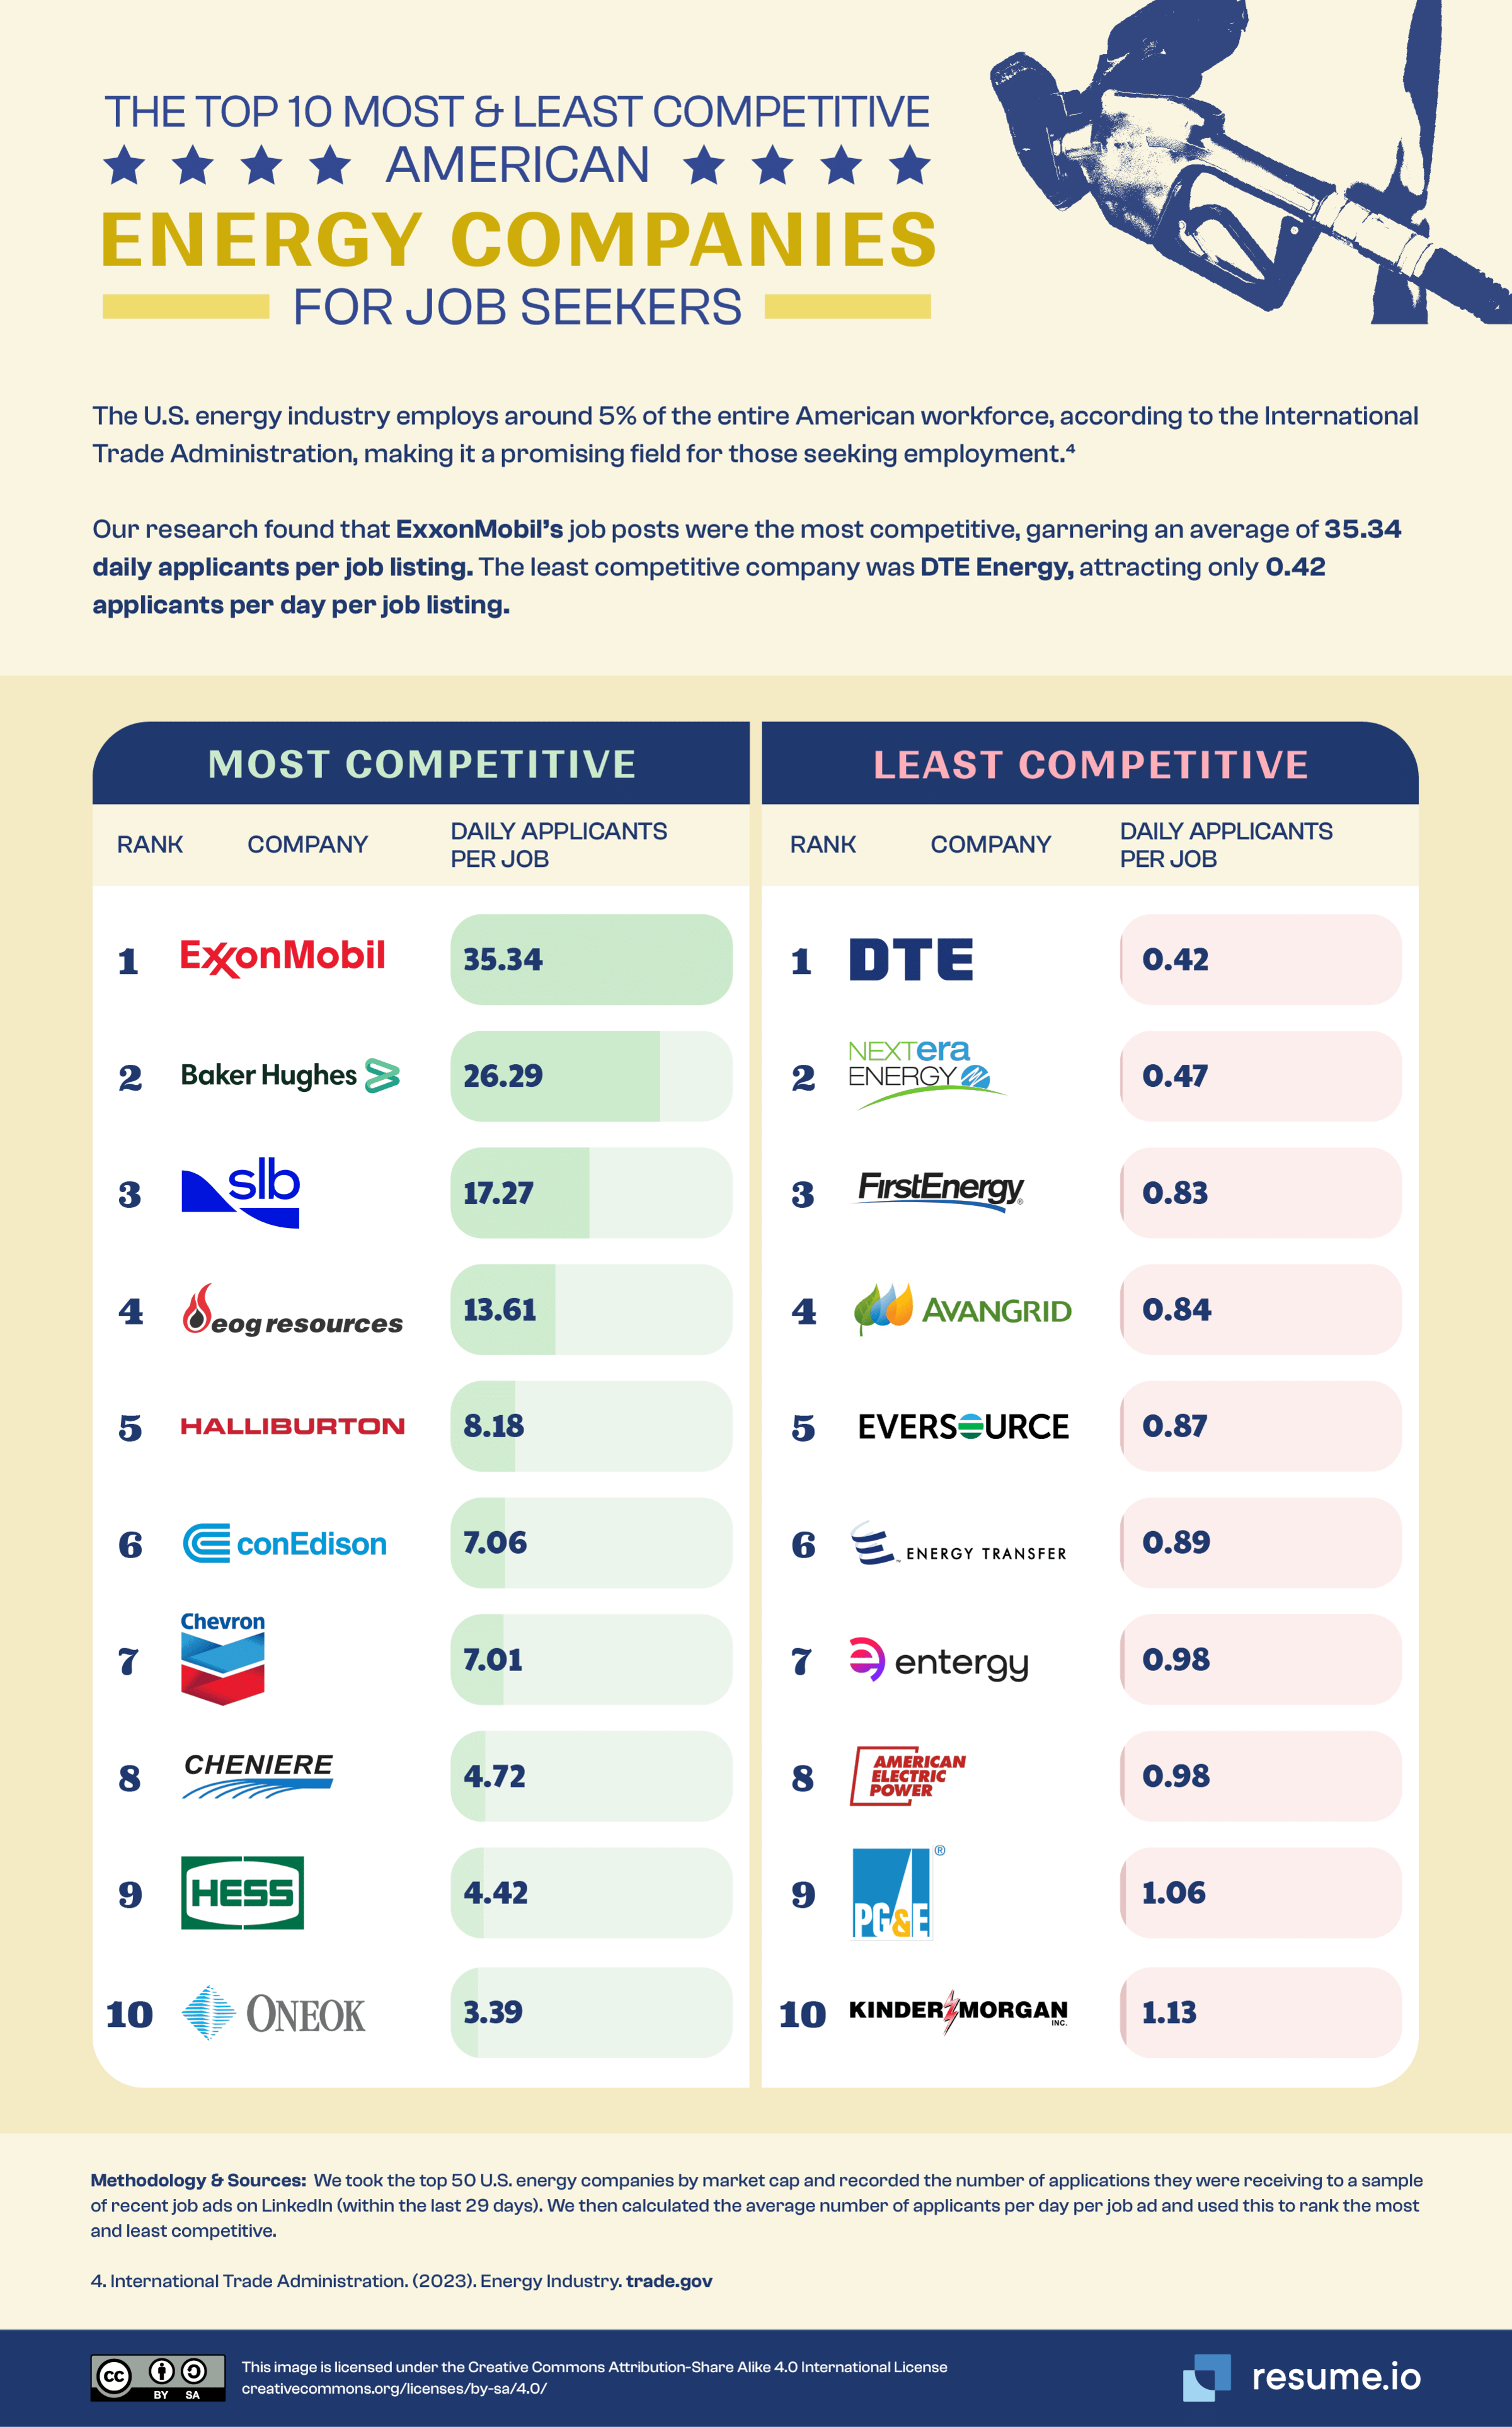 The top 10 most and least competitive energy companies